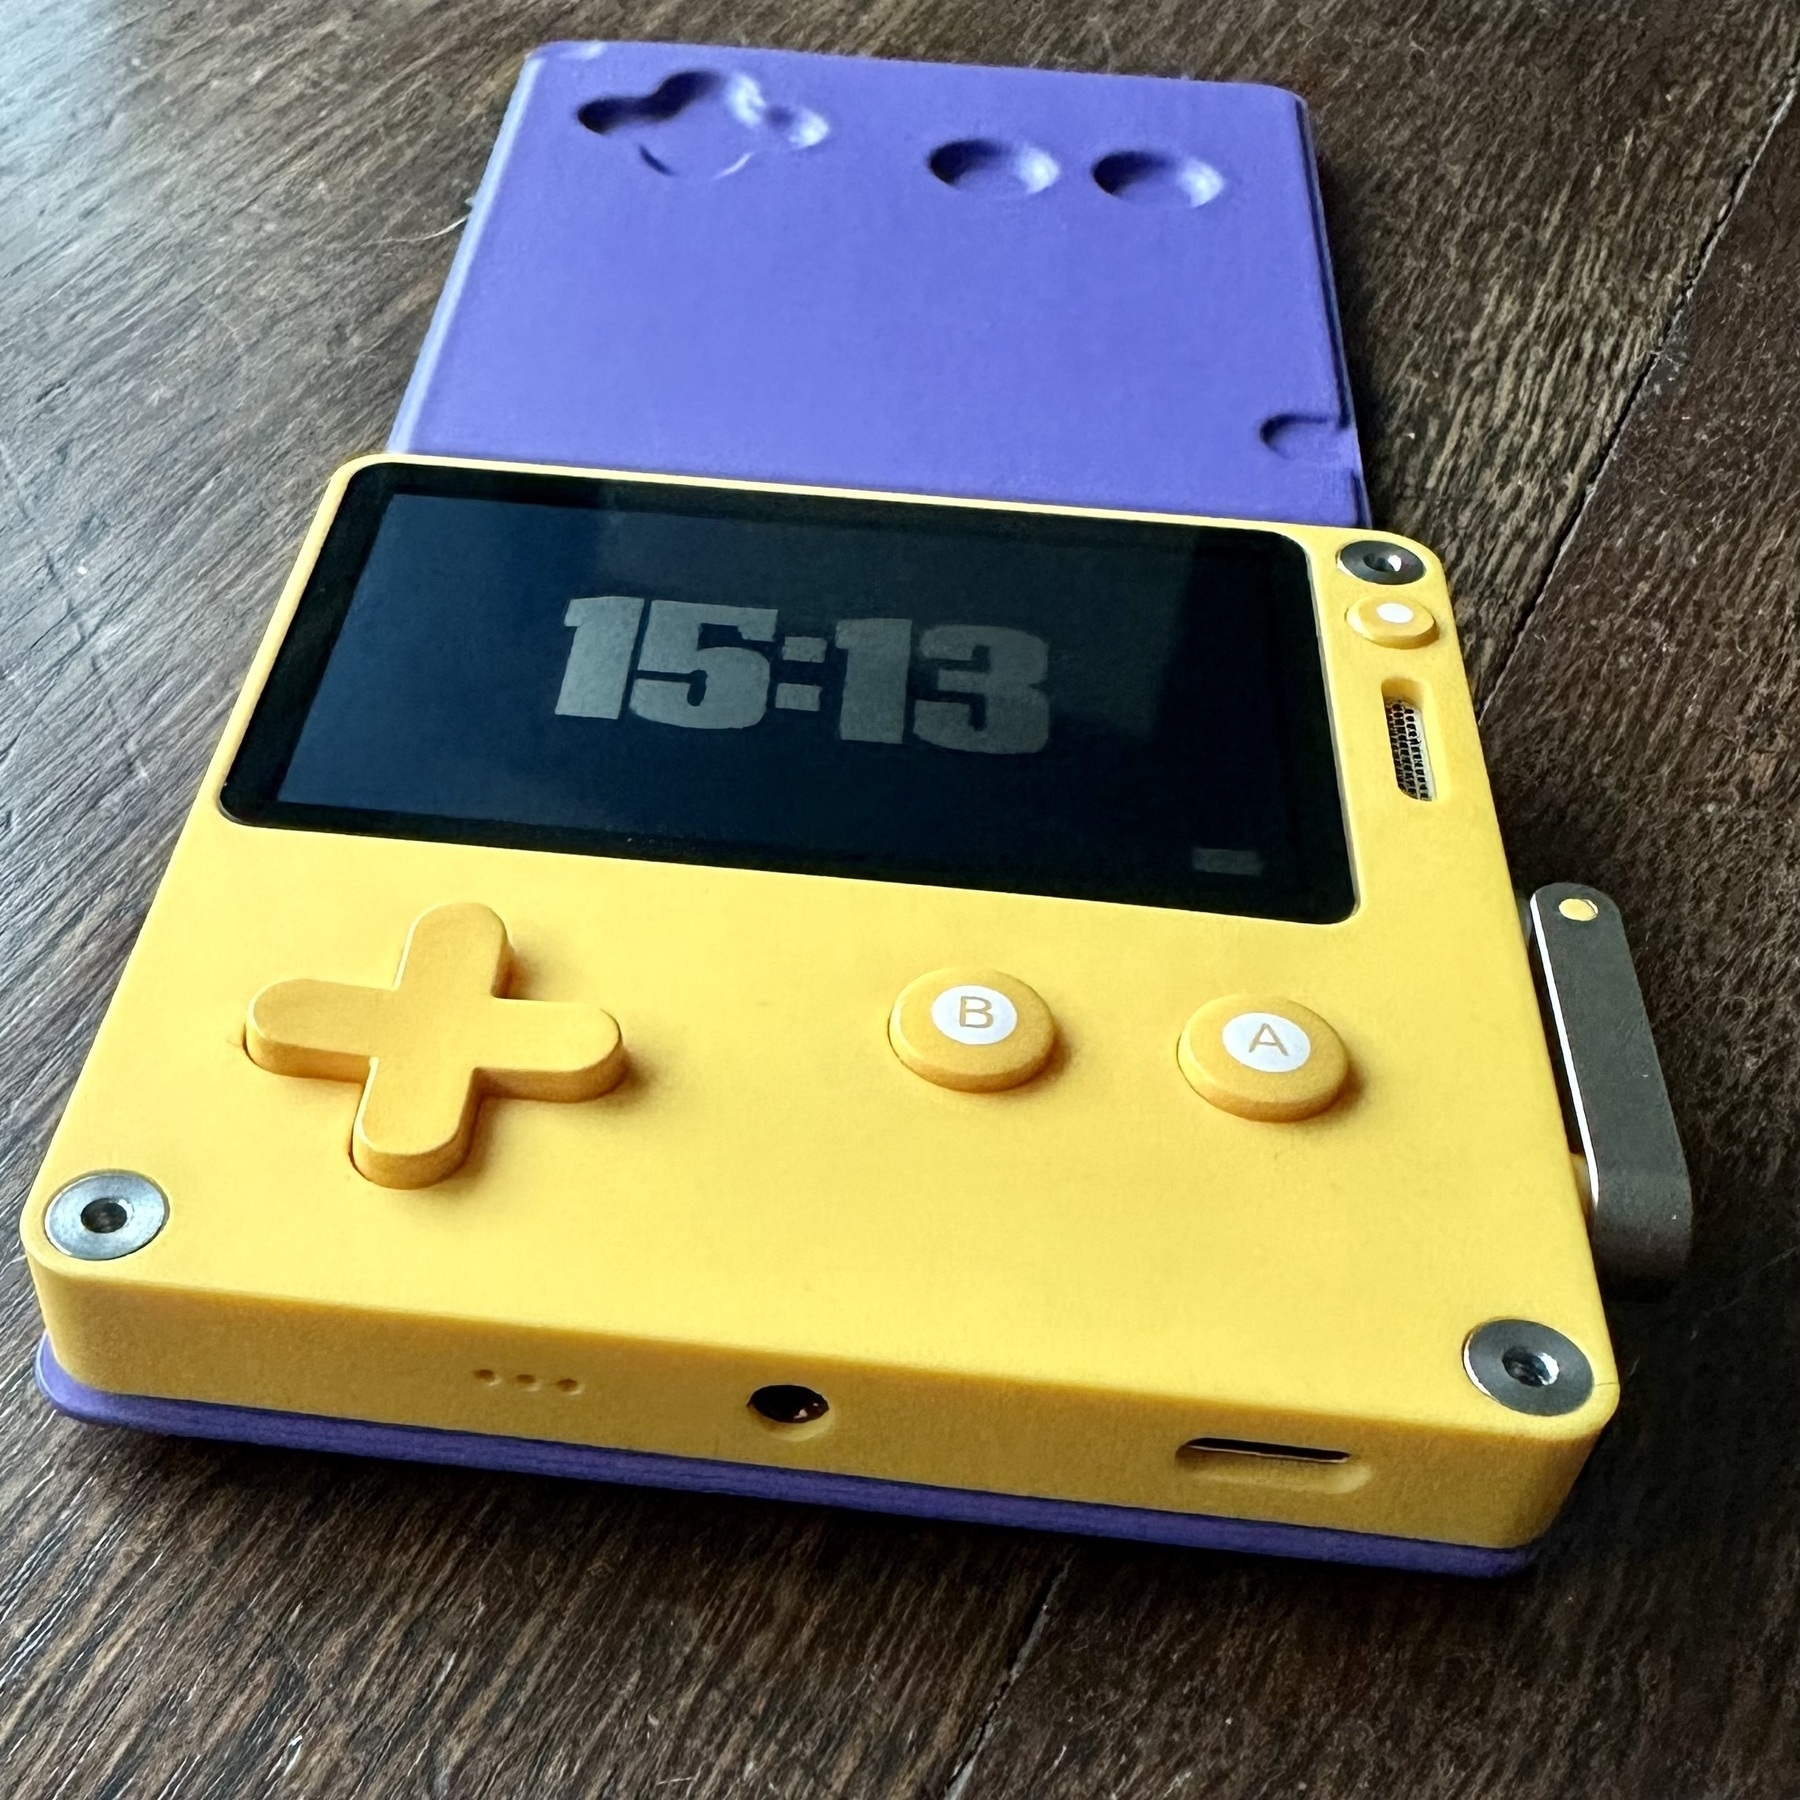 Playdate handheld game system, in standby mode with open purple cover